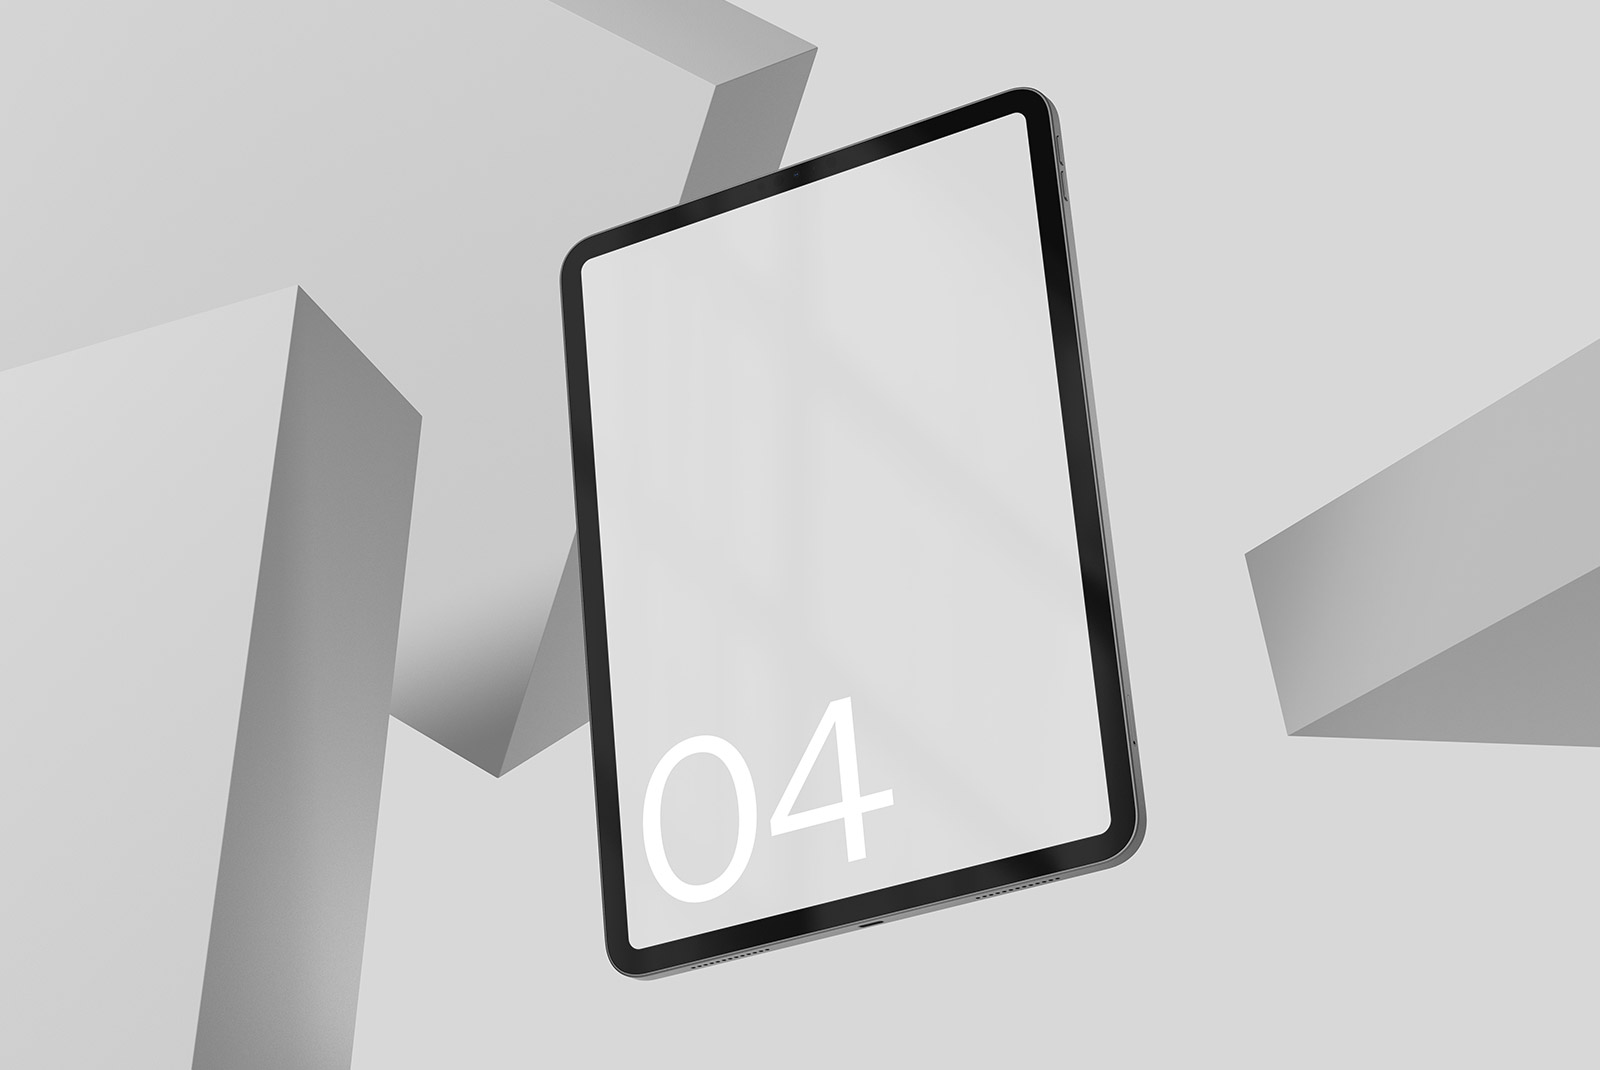 Minimalist tablet mockup with abstract geometric background in grayscale, perfect for presenting UI/UX designs, digital assets for designers.